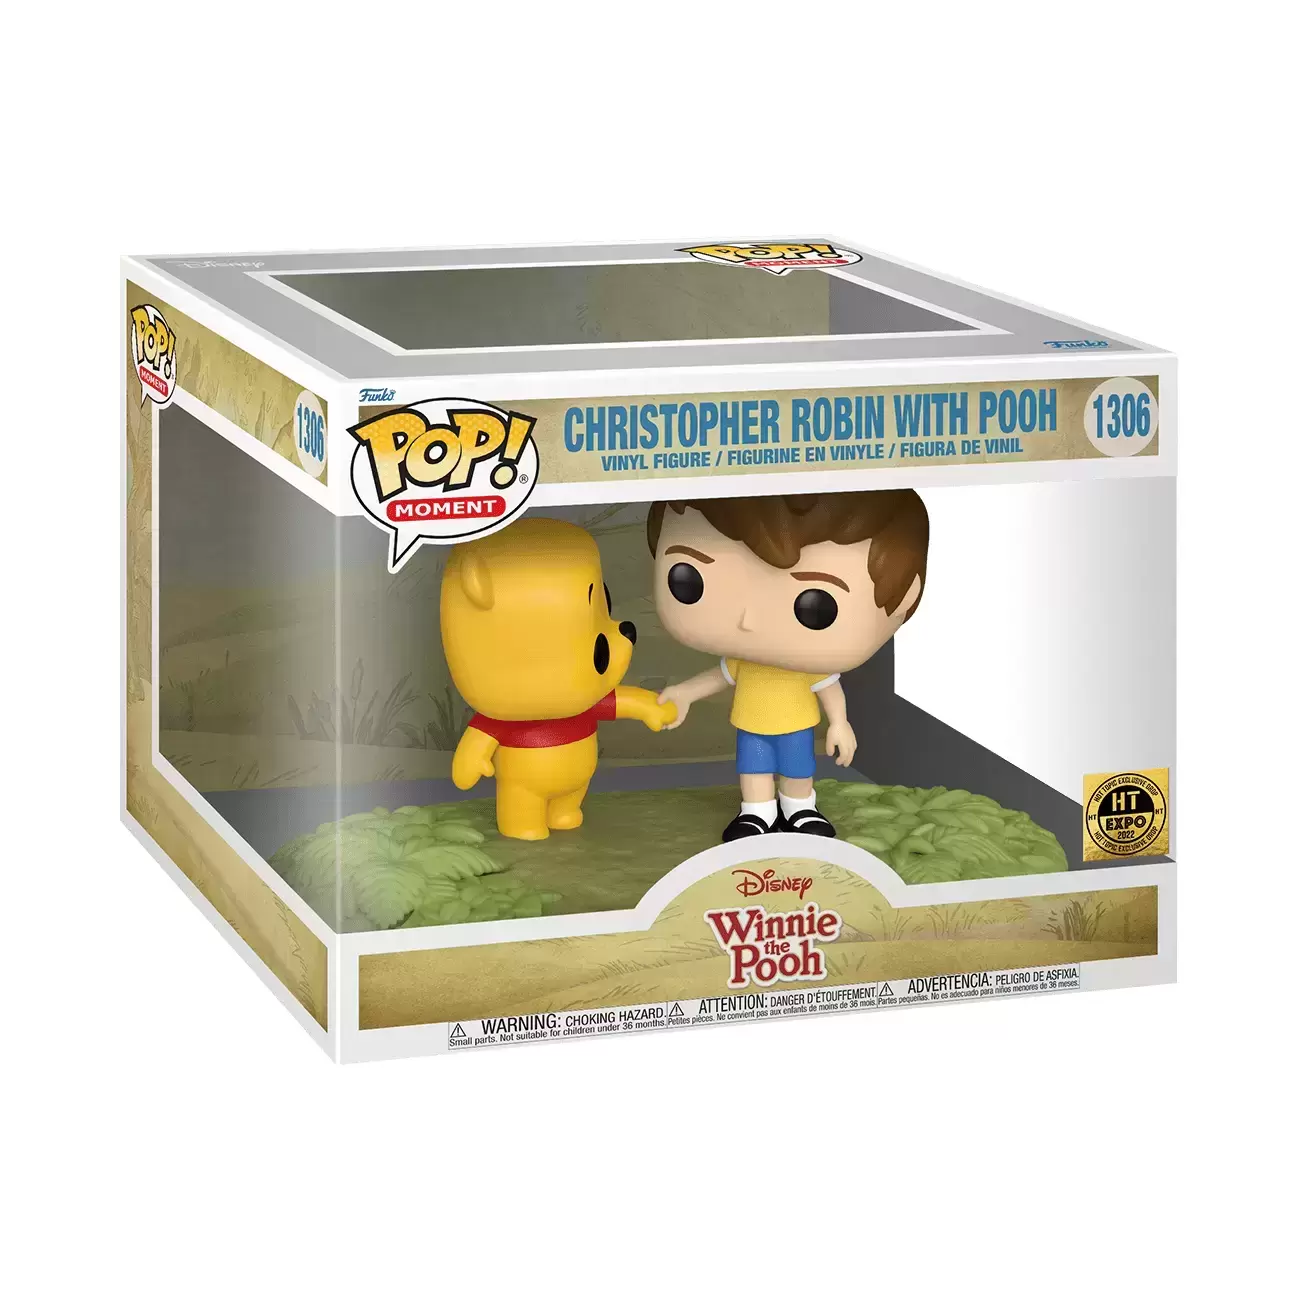 POP! Disney - Winnie the Pooh - Christopher Robin With Pooh